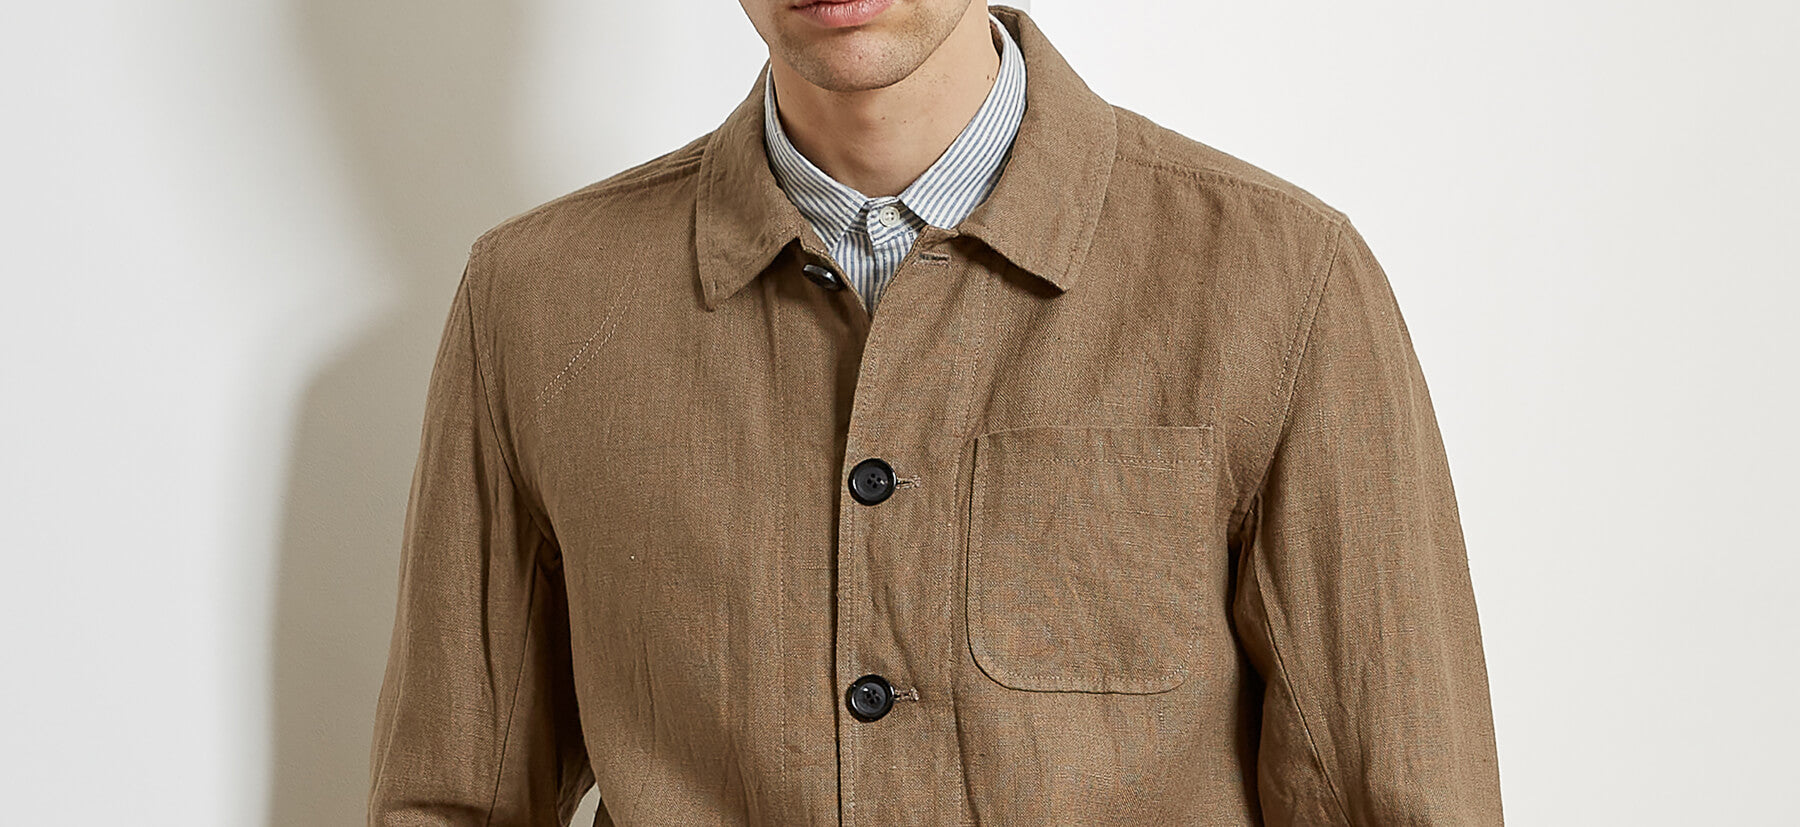 New in: the Cowboy Chore jacket in Evering linen